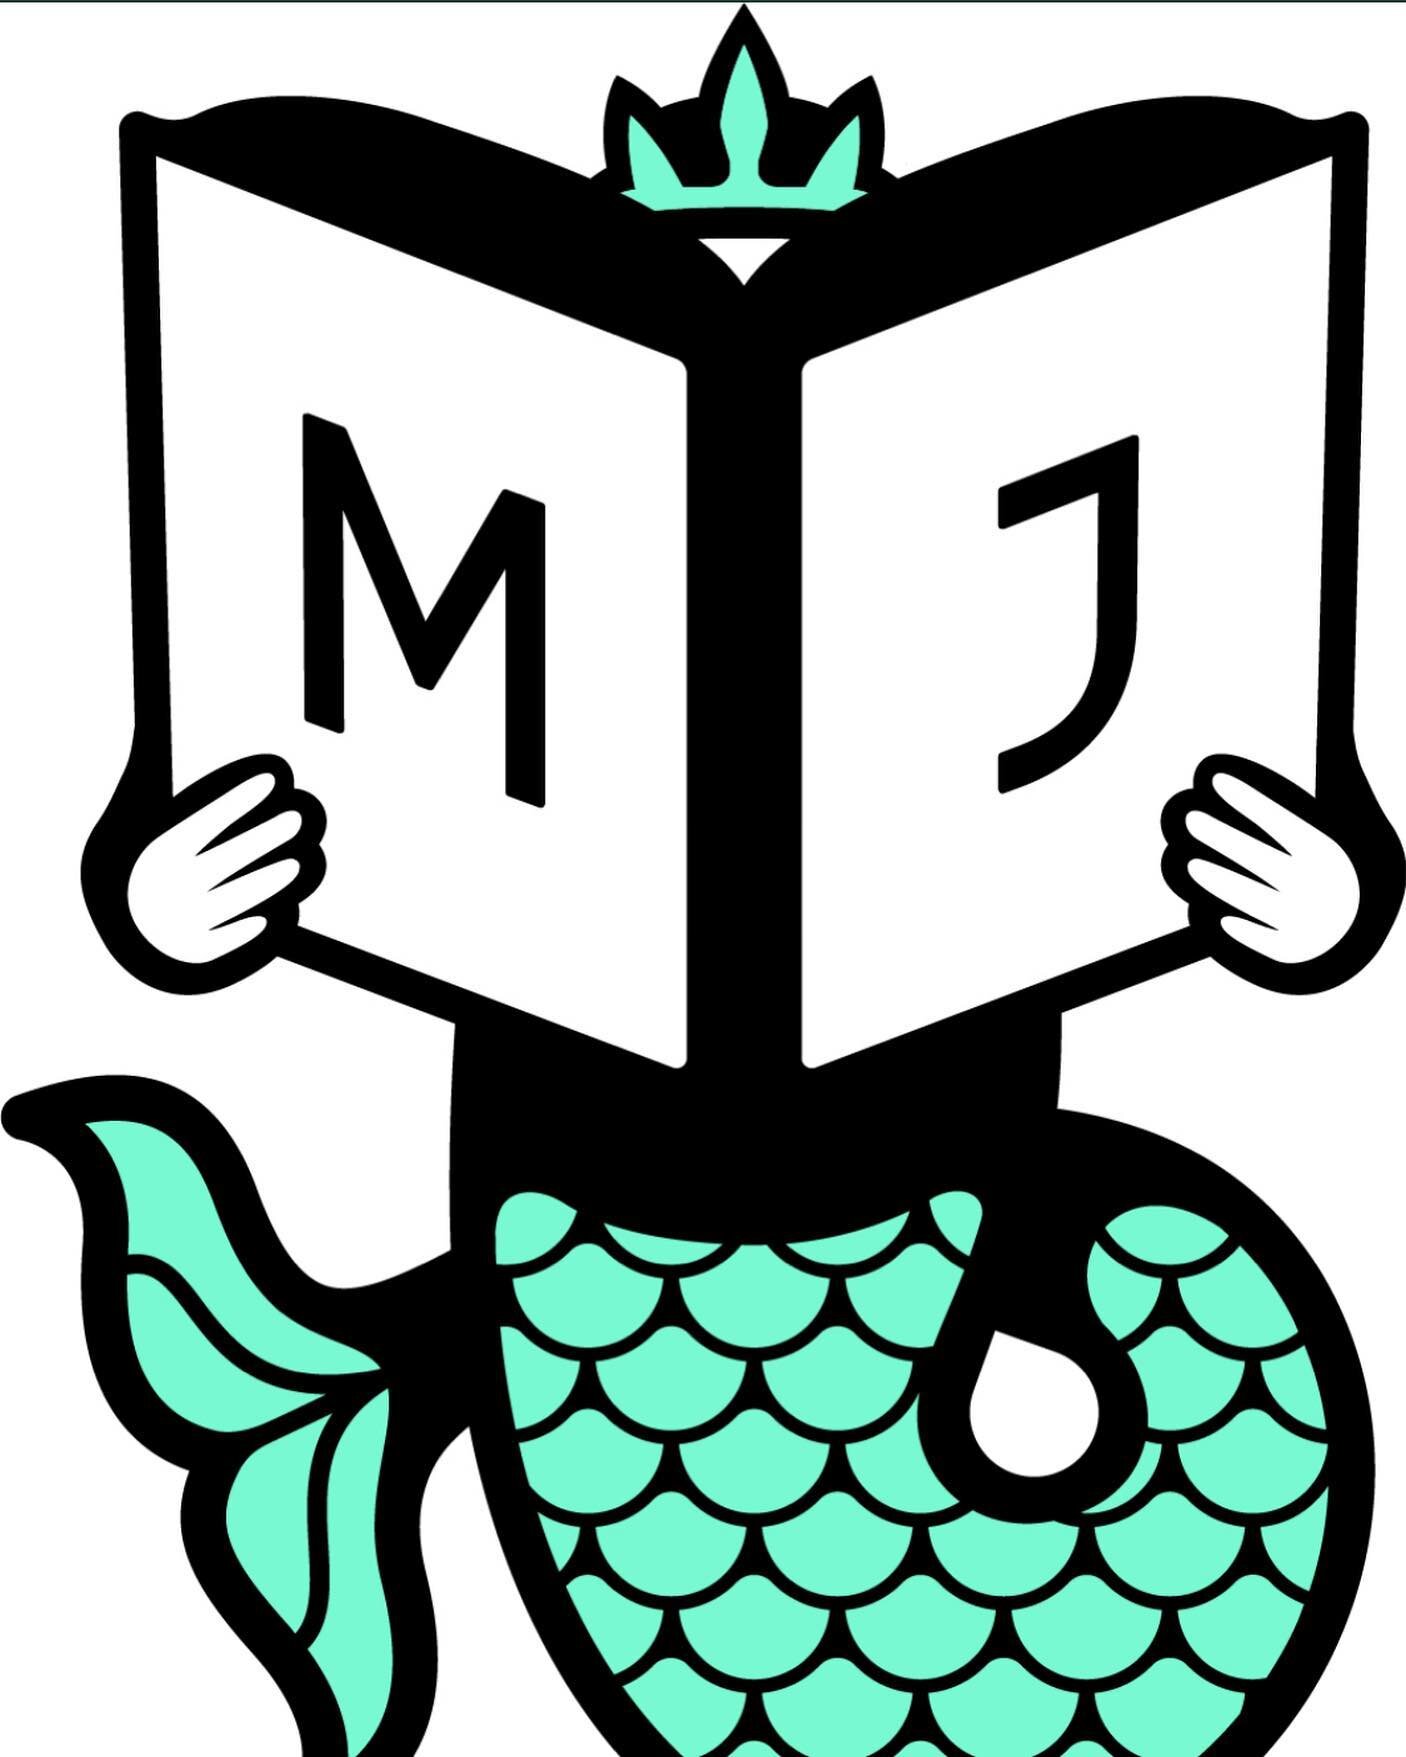 My publisher @michaeljbooks have rebranded! Taking it back to the original mermaid motif but with a modern, fresh logo 😍 I love it and couldn&rsquo;t be more proud to be published by this incredible imprint. Can&rsquo;t wait to see this logo on the 